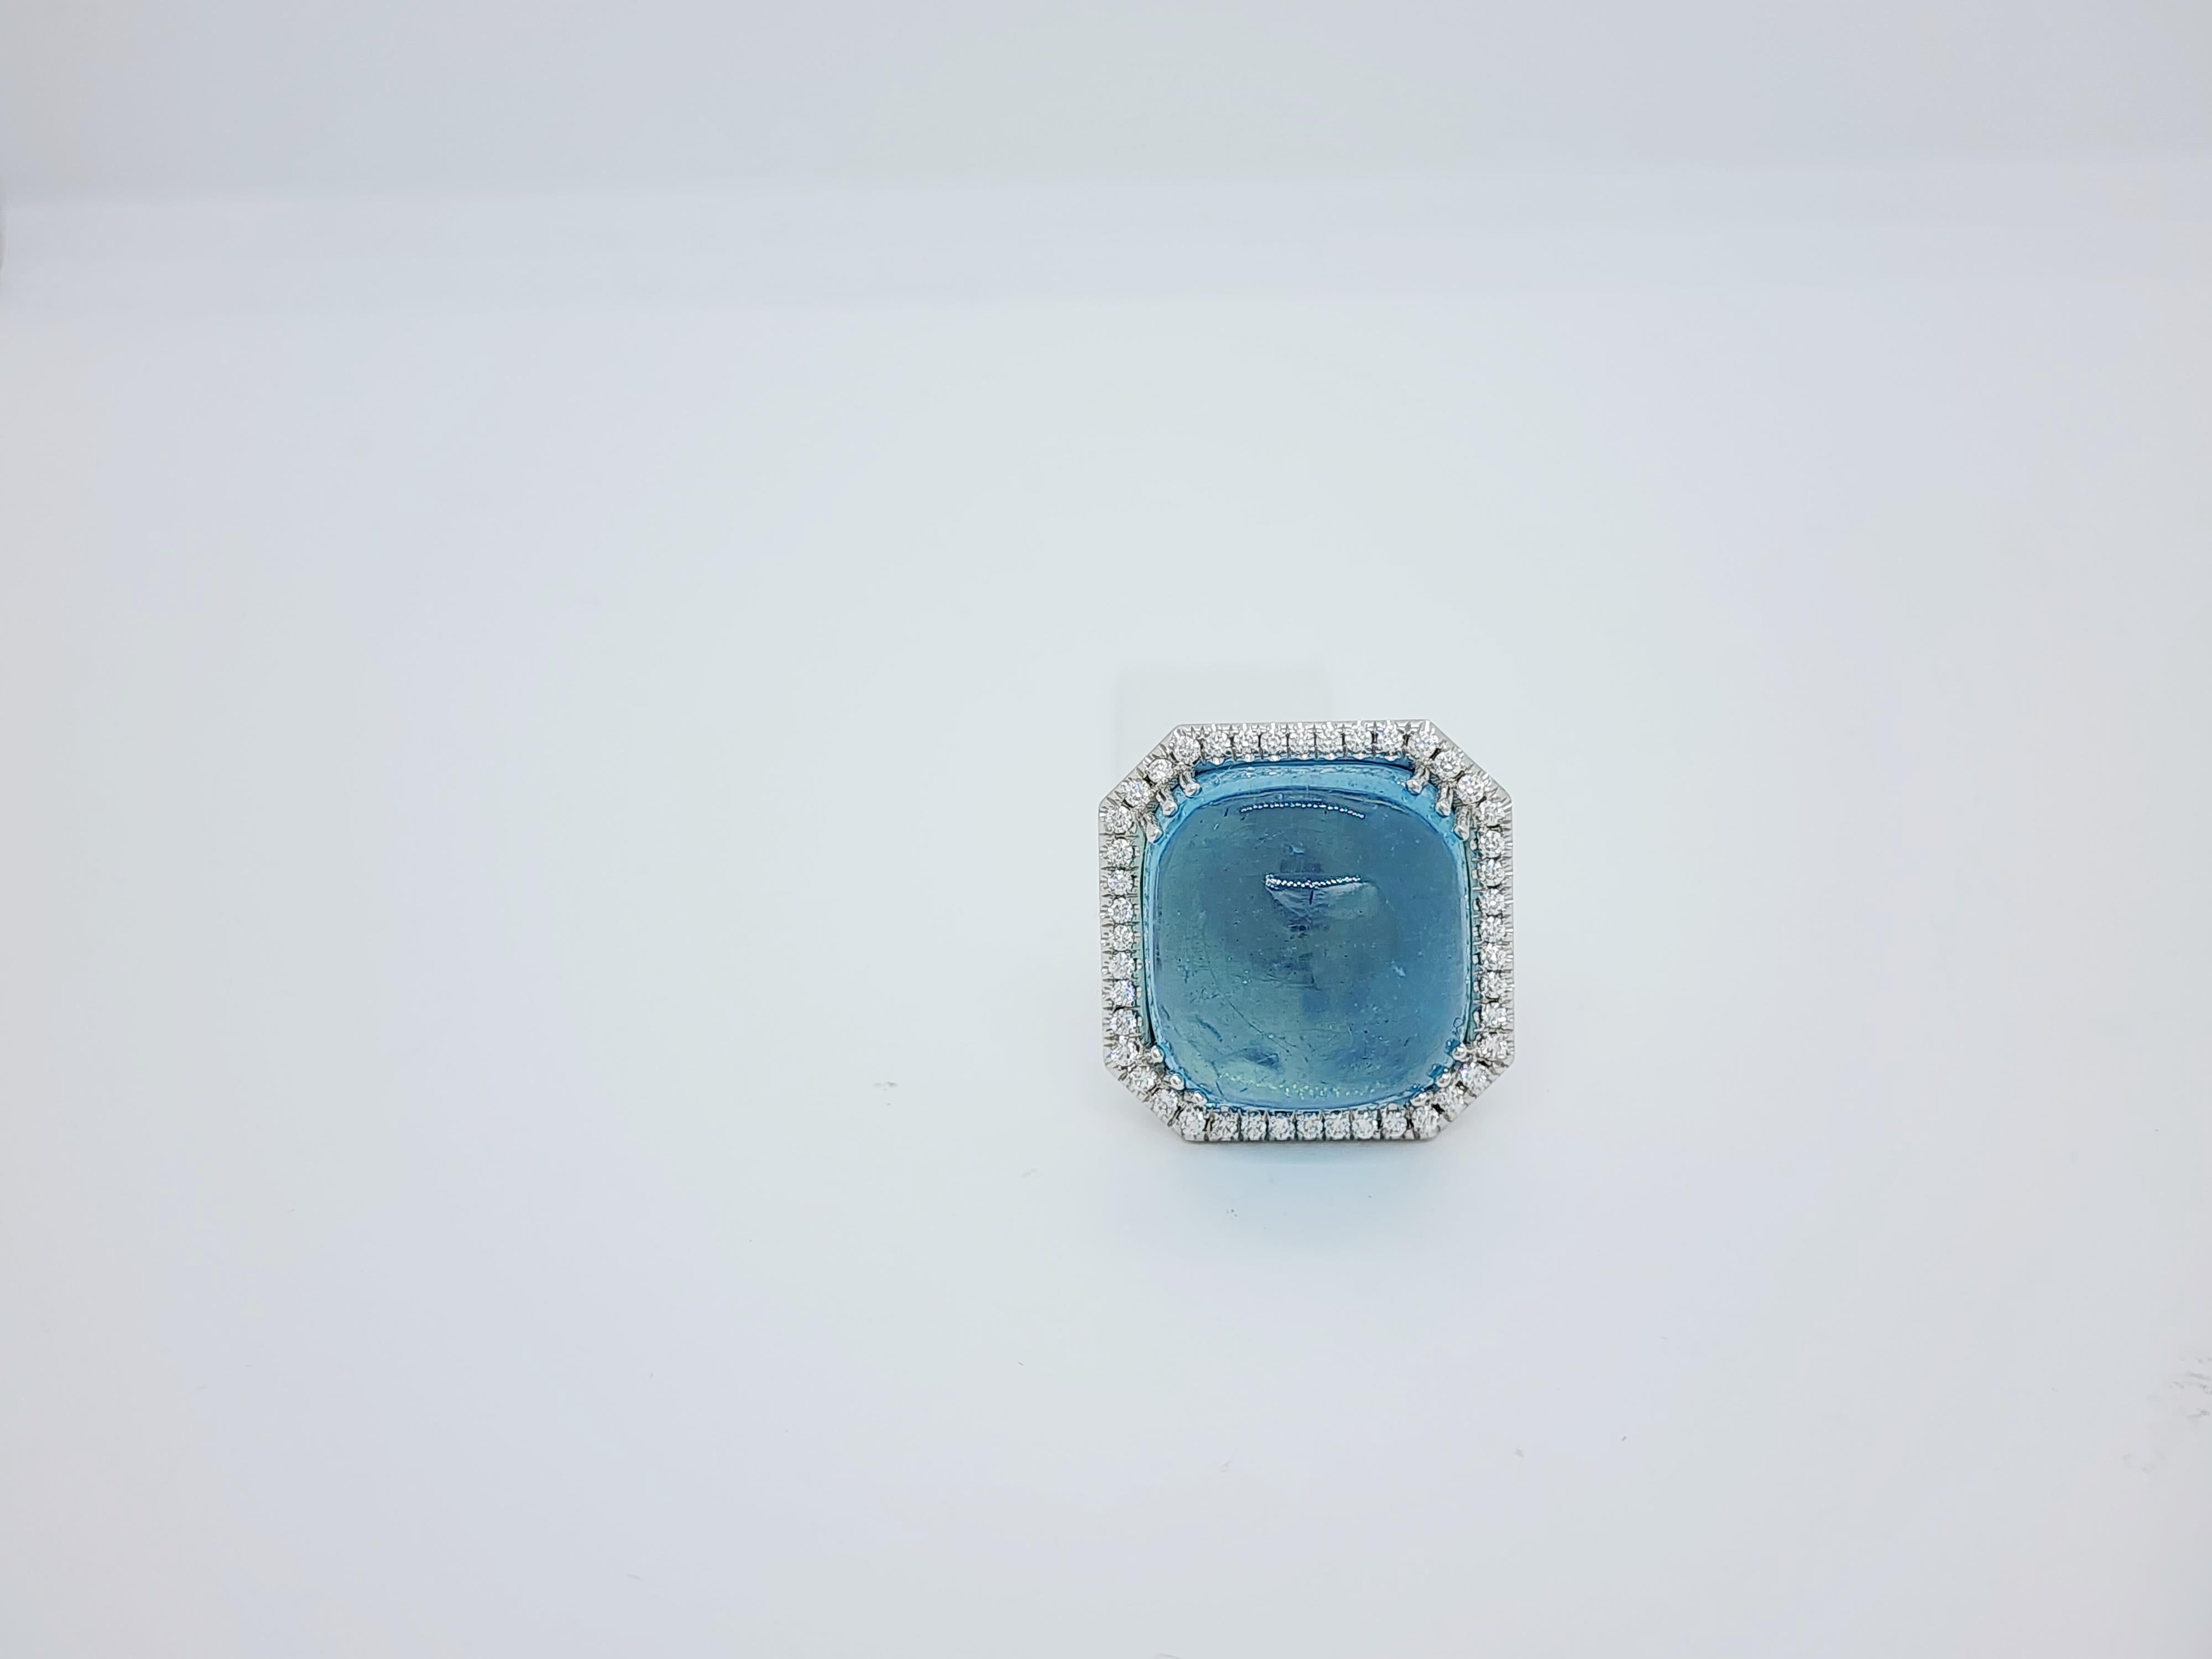 Gorgeous 42.40 ct. aquamarine cabochon with 1.00 ct. good quality white diamond rounds.  Handmade in 18k white gold.  Ring size 4.75.